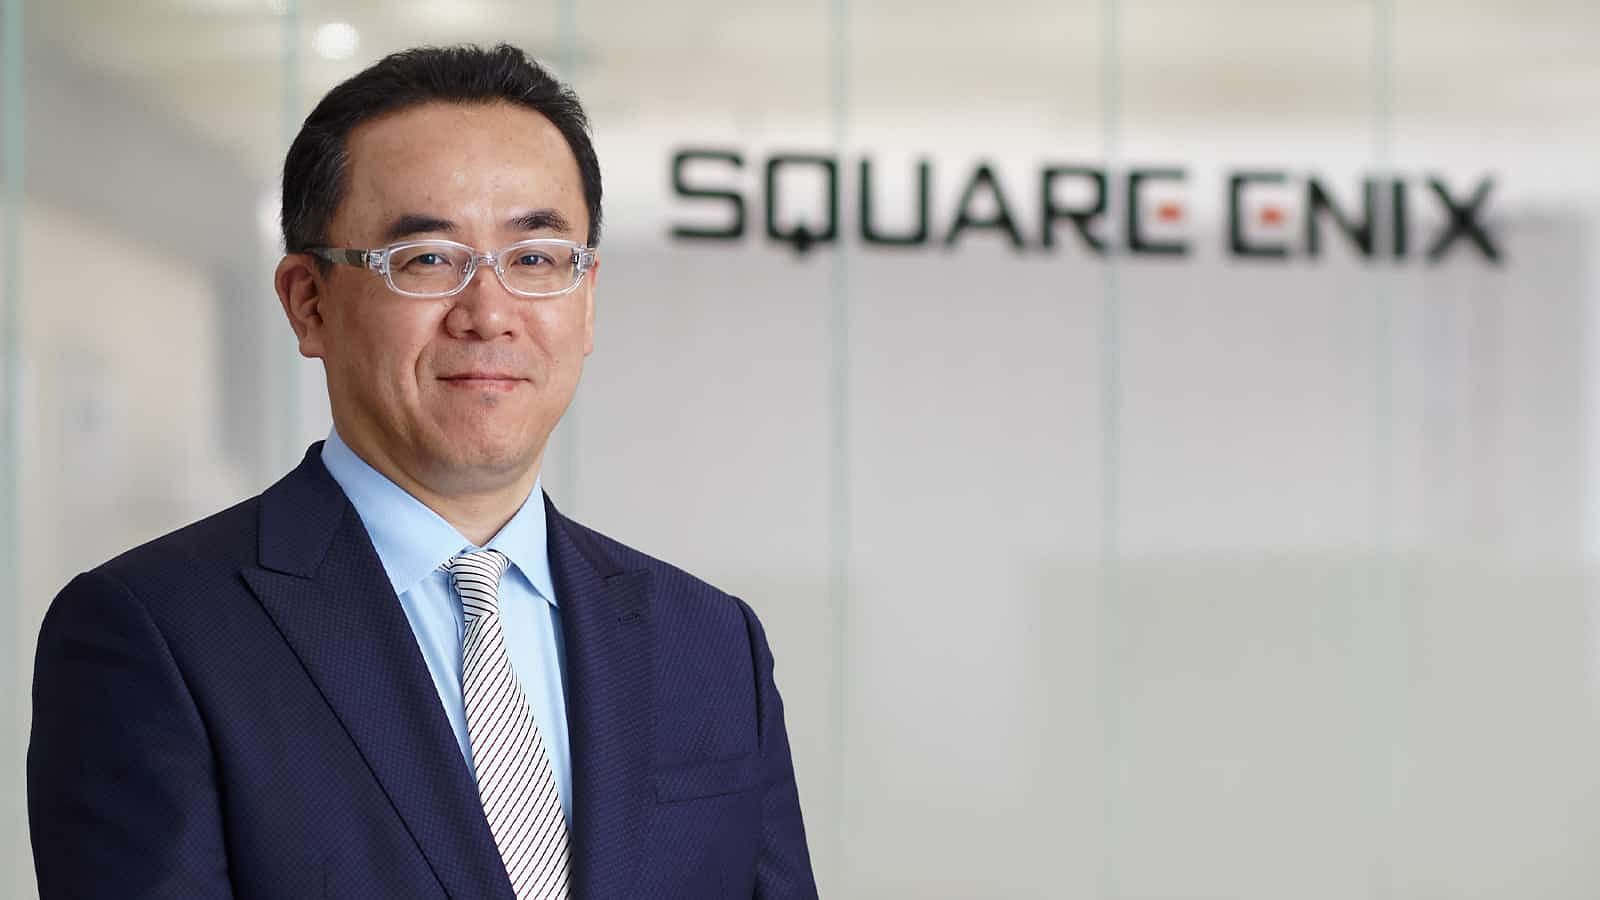 What's coming from Square Enix in 2022?